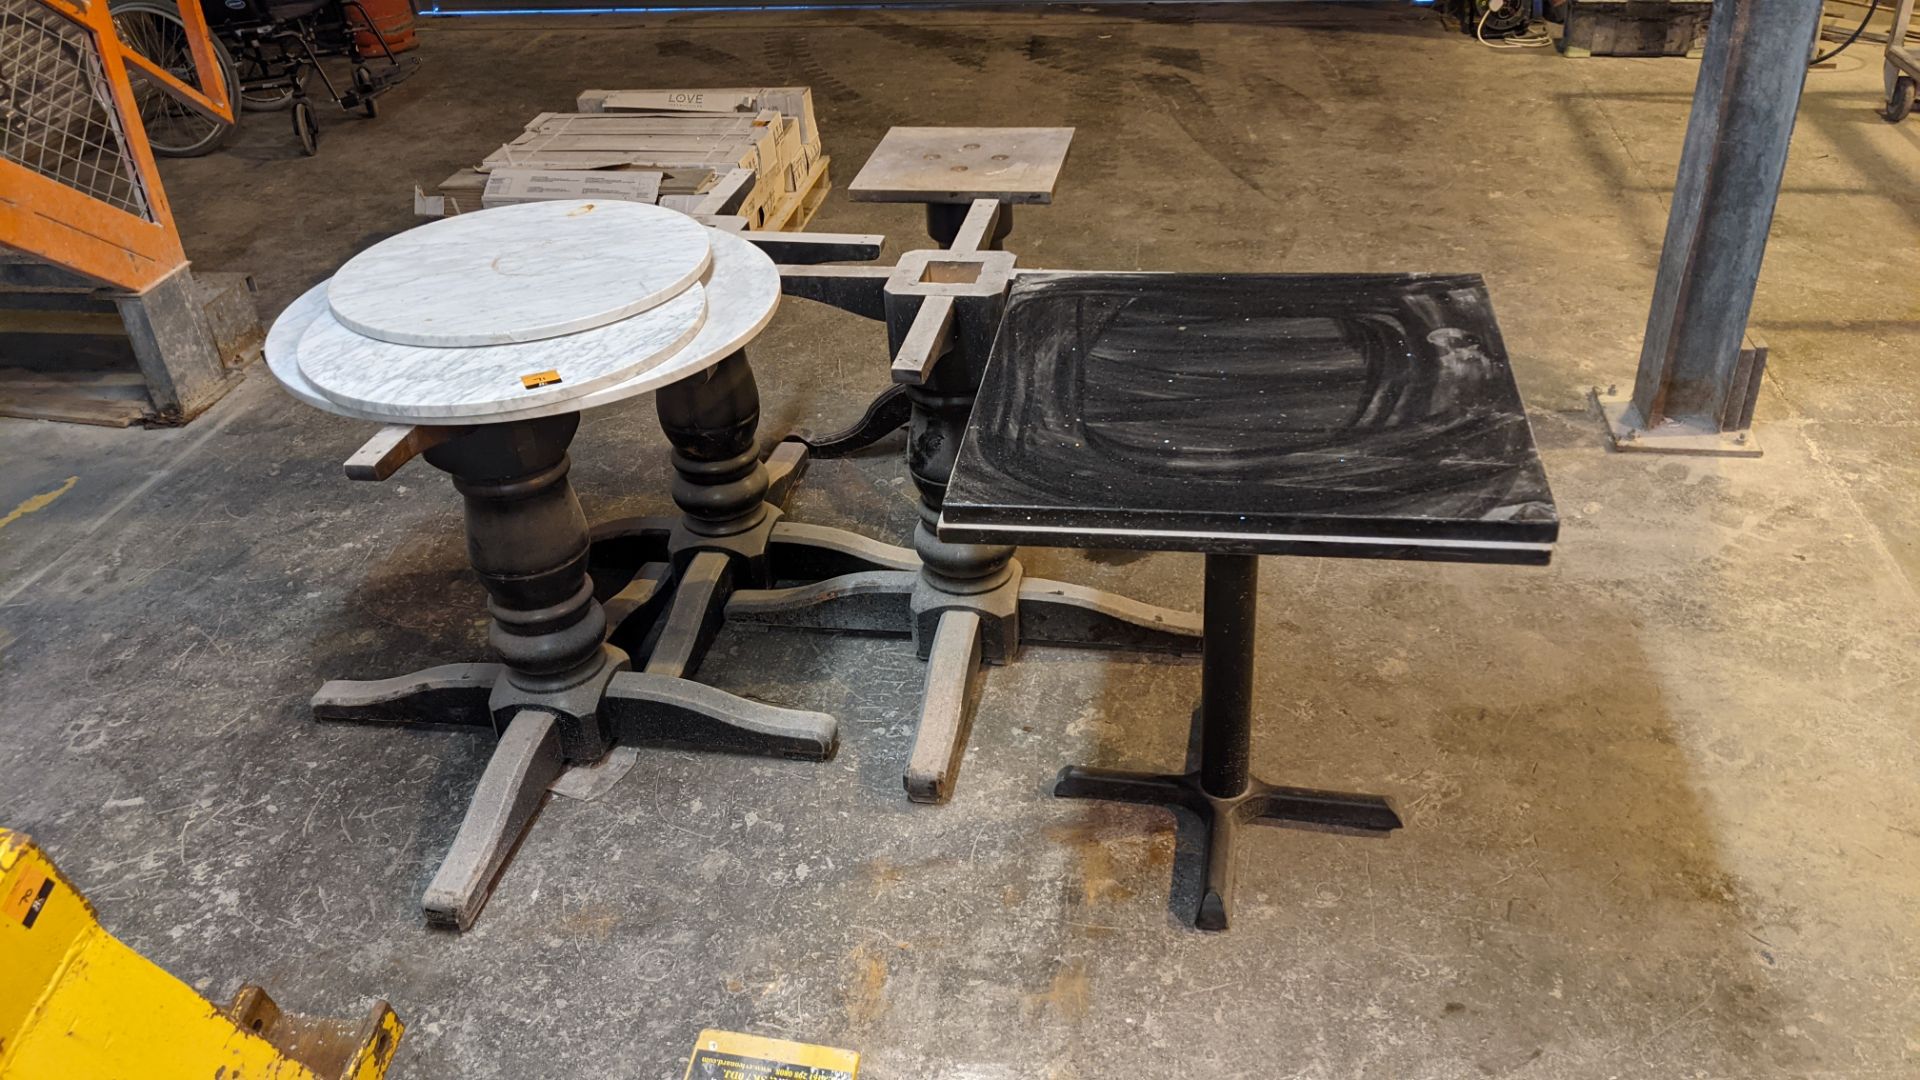 5 off assorted circular & square granite/quartz/marble table tops plus 4 off heavy-duty wooden turnt